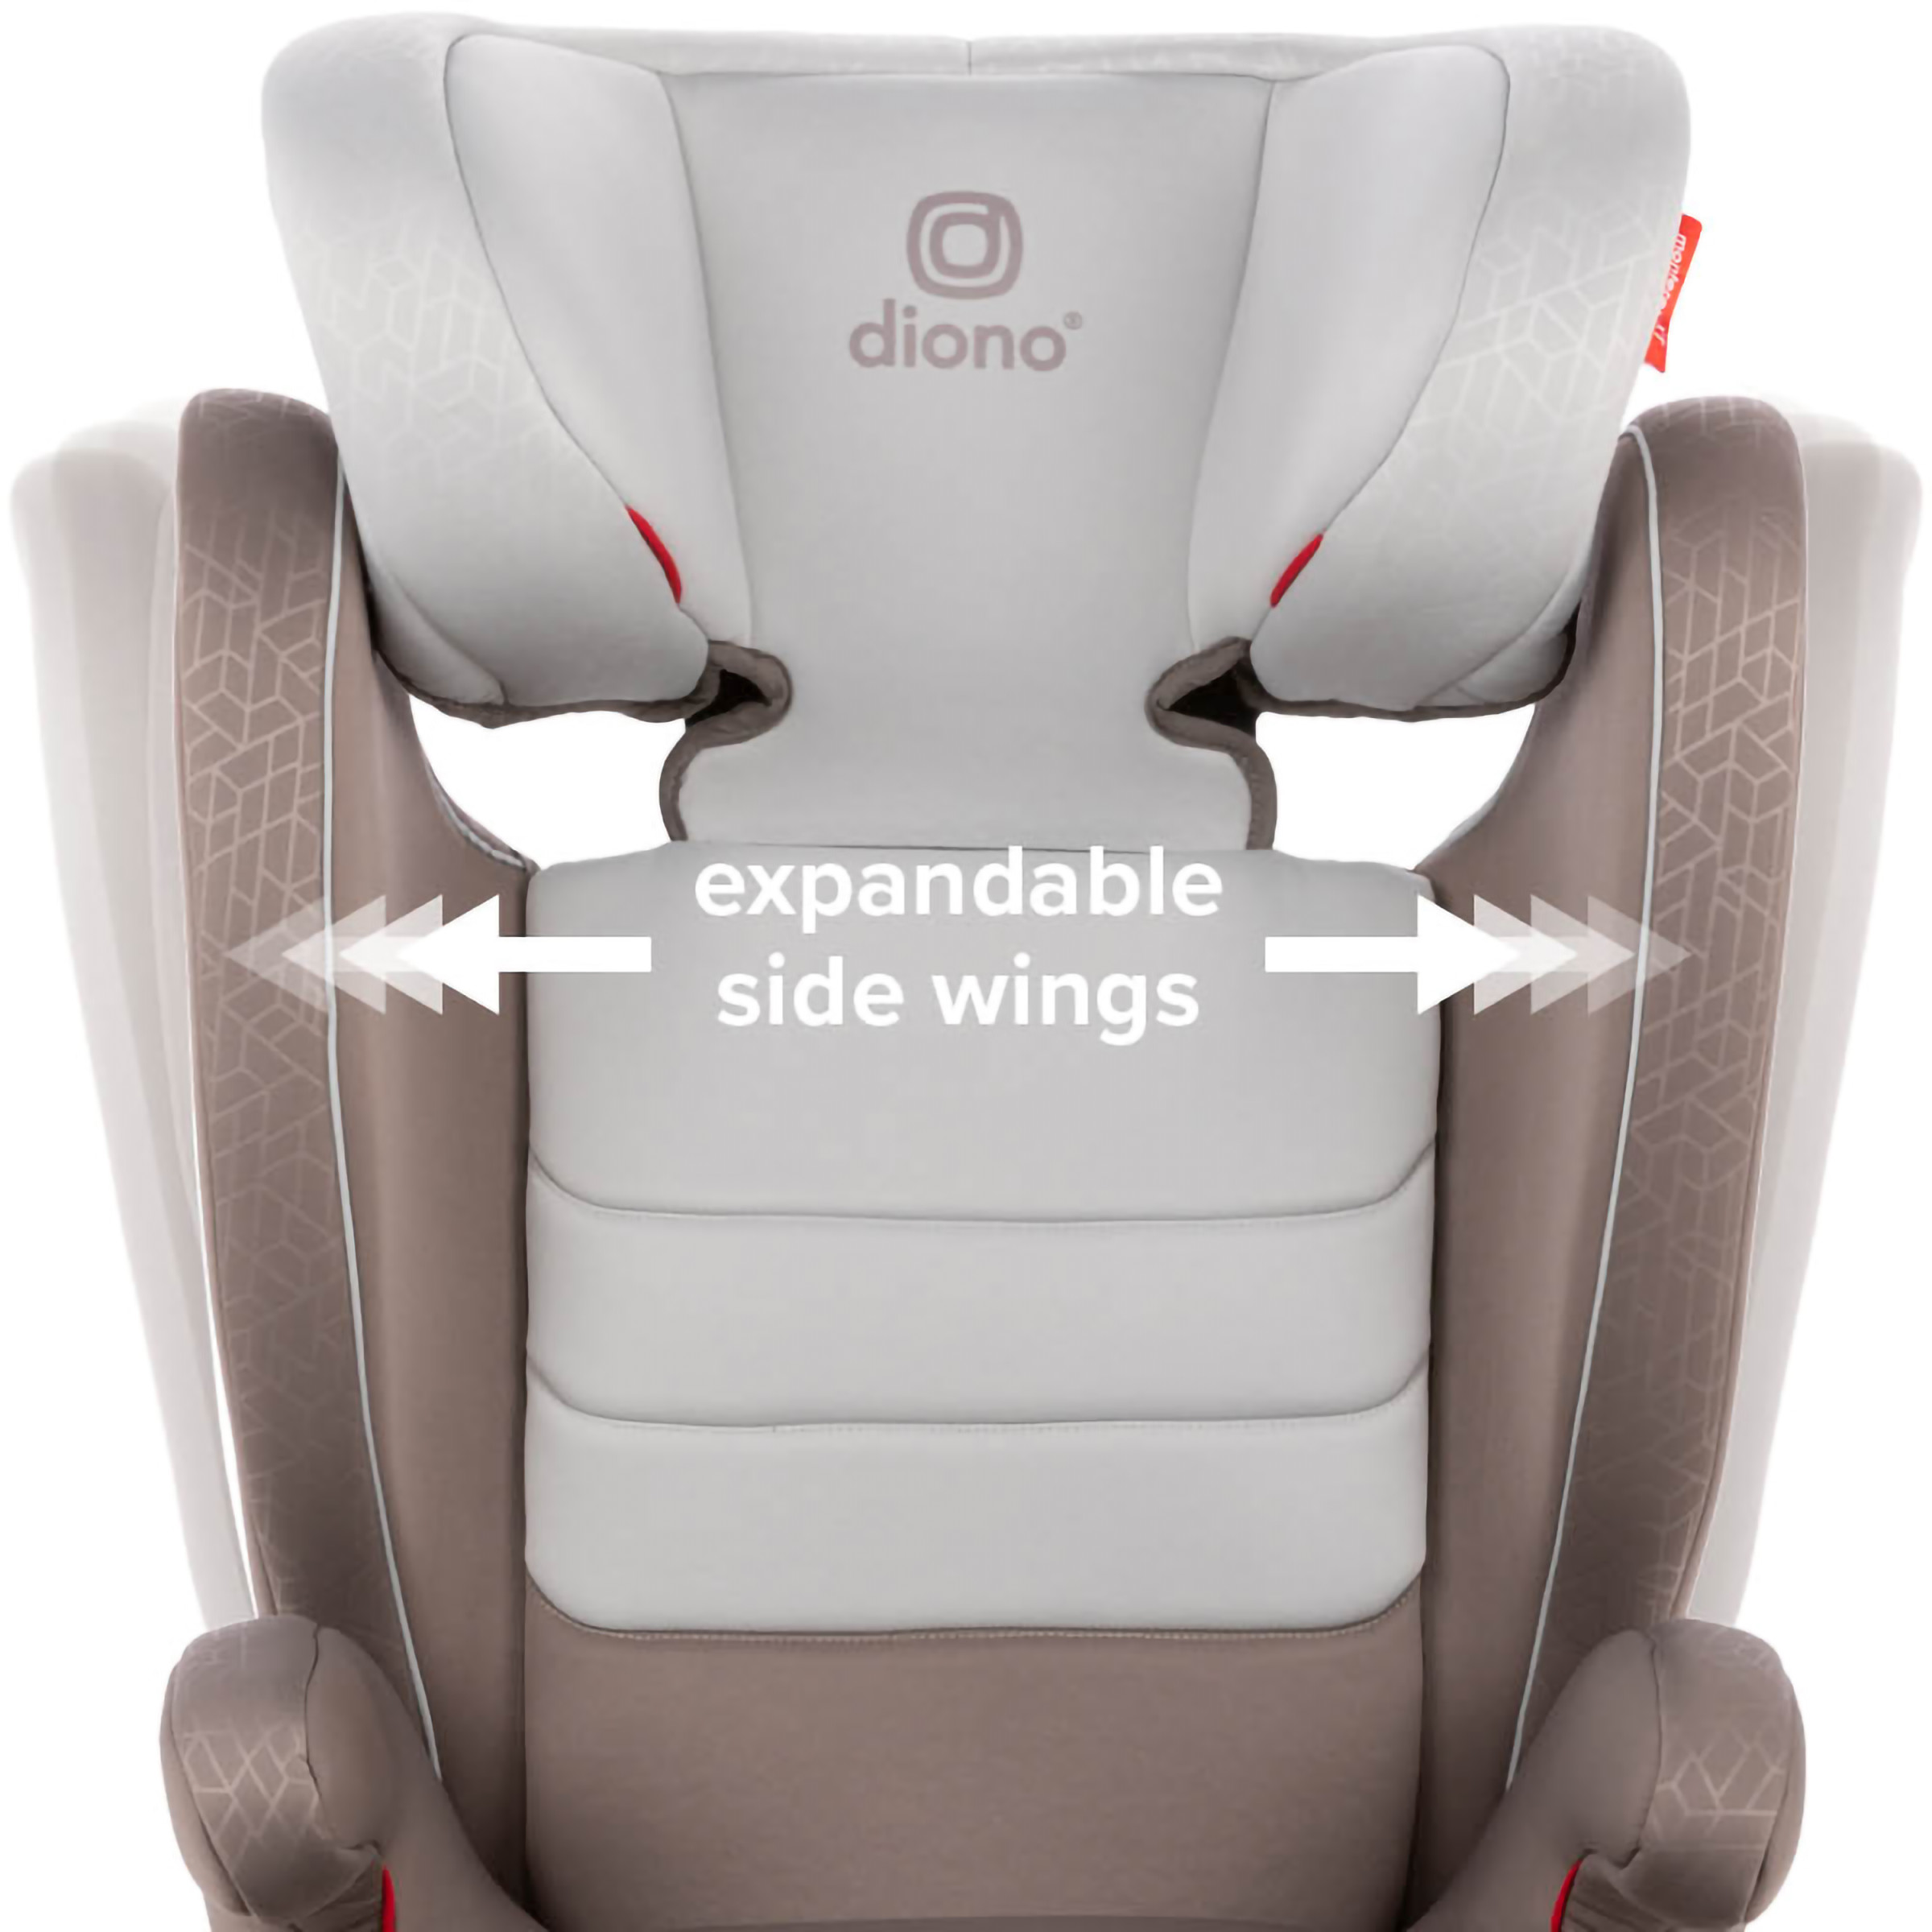 Diono Monterey XT Latch 2-in-1 Expandable Booster Car Seat, Gray Oyster - image 8 of 13